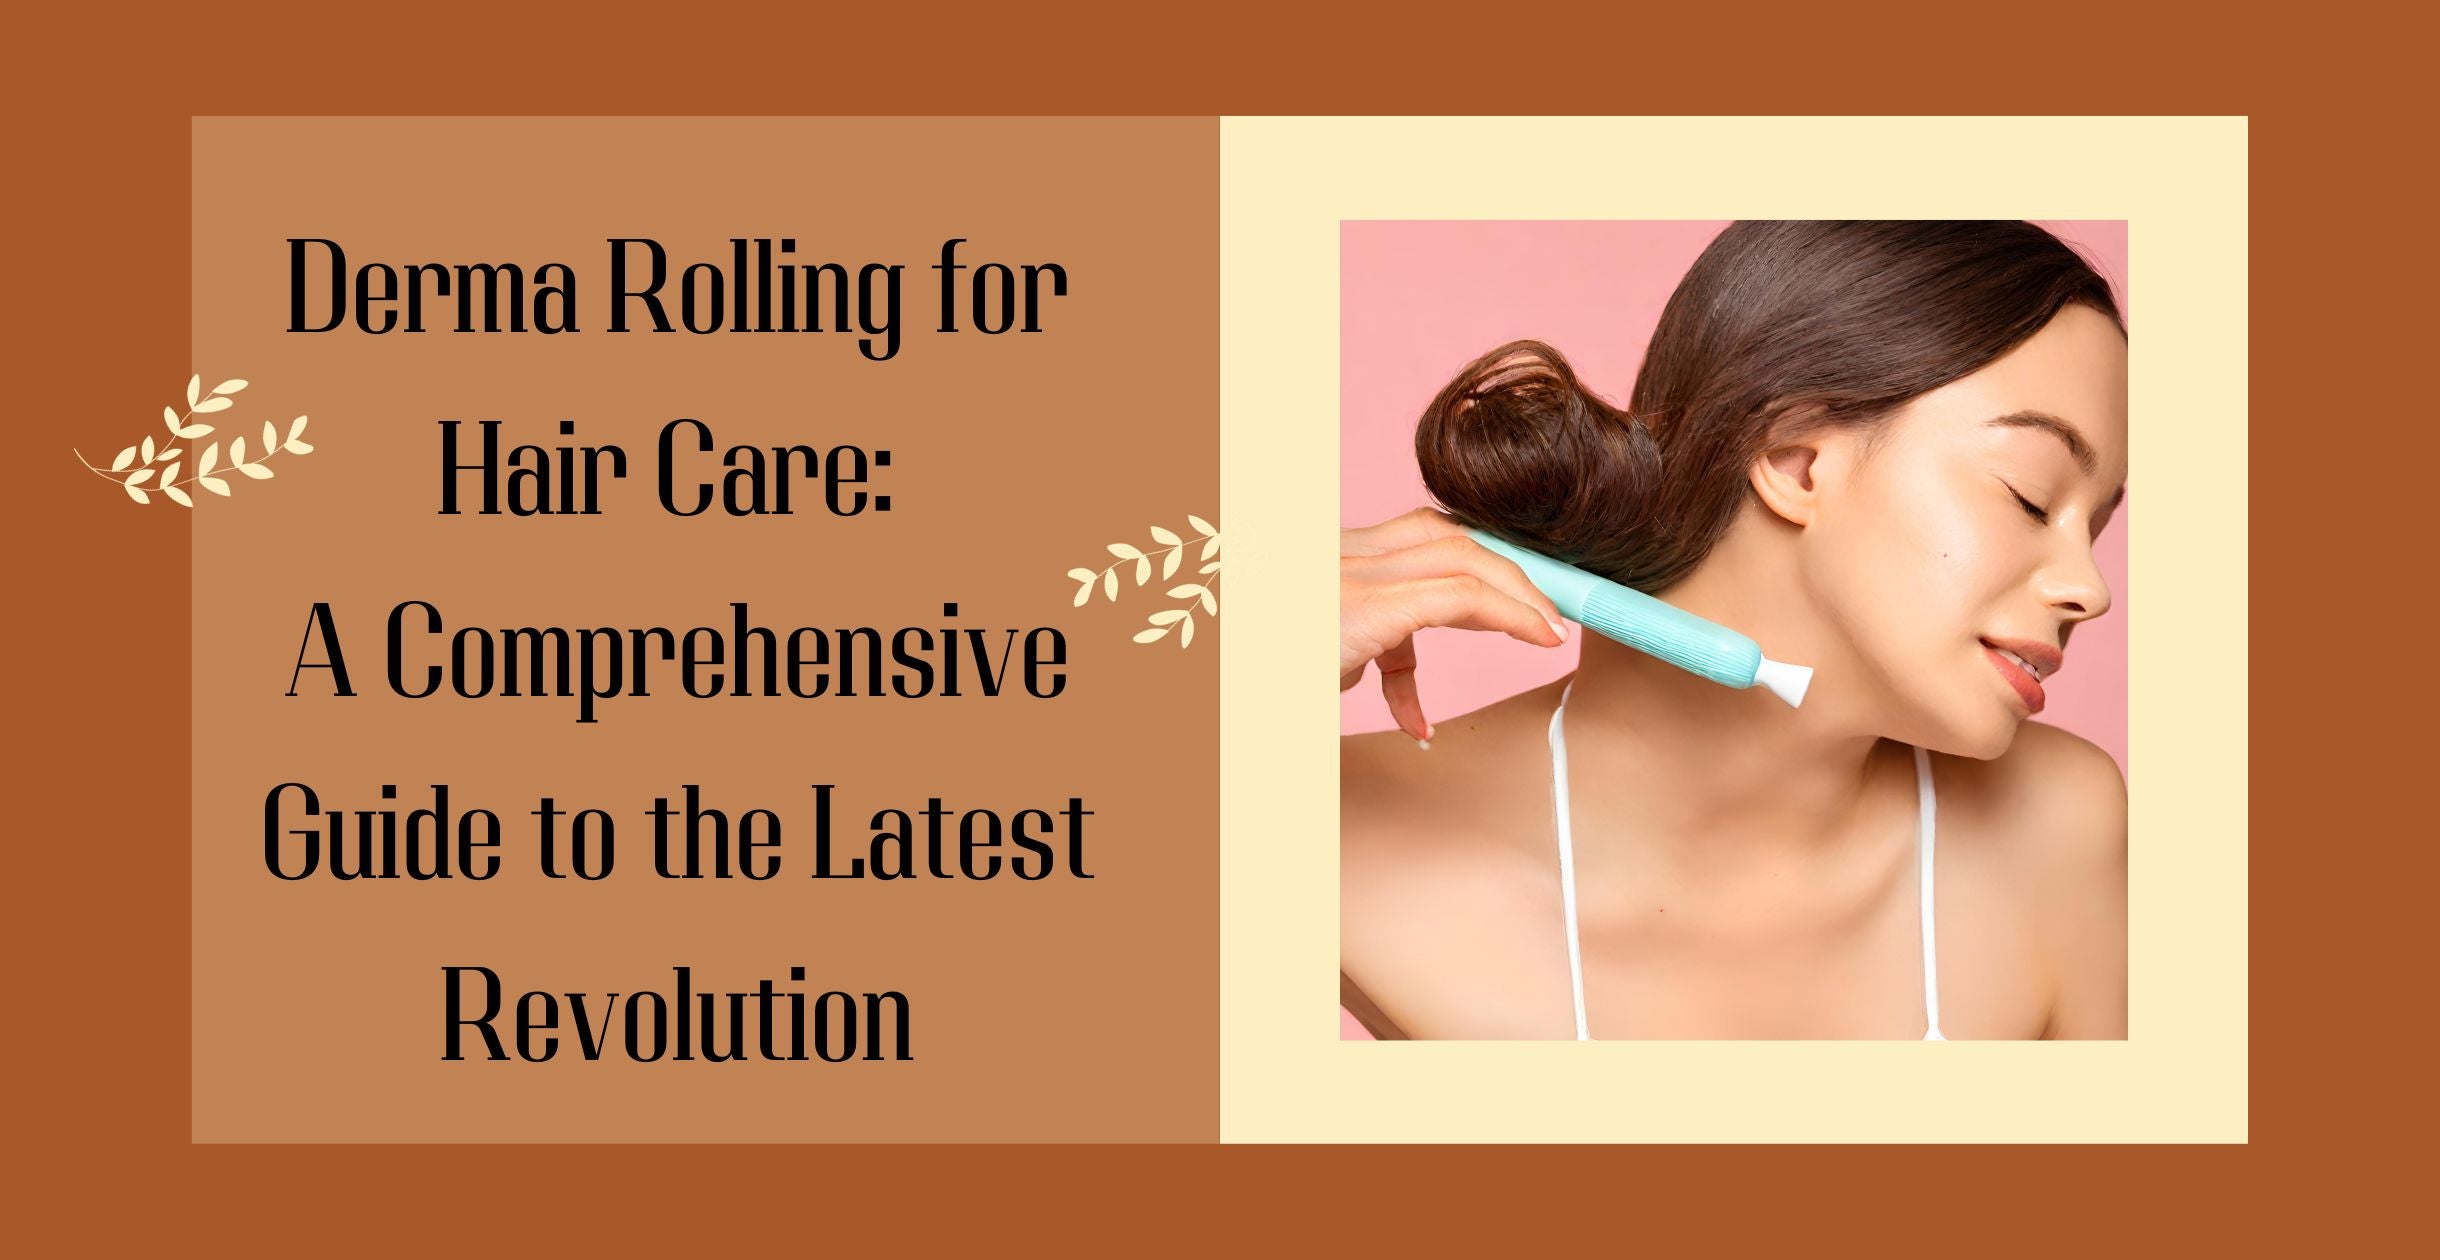 Derma Rolling for Hair Care: A Comprehensive Guide to the Latest Revolution